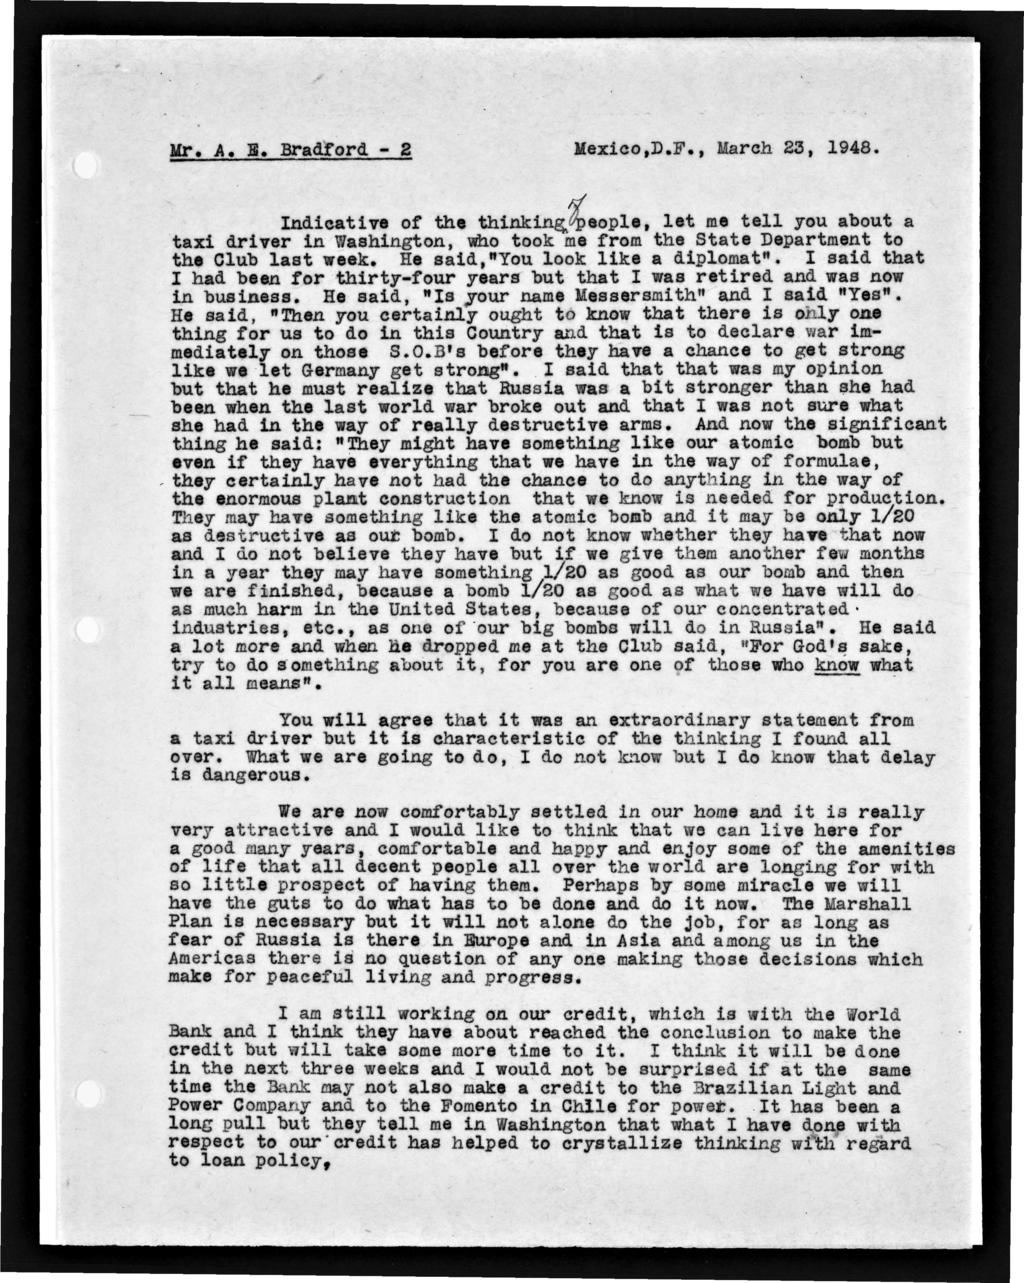 Mr. A. 1. Bradford - 8 Mexico,D.F., March S3, 1948. Indicative of the thinking/people, let mt tell you about a taxi drivwr la Washington., who took me from the State Department to the Club last week.